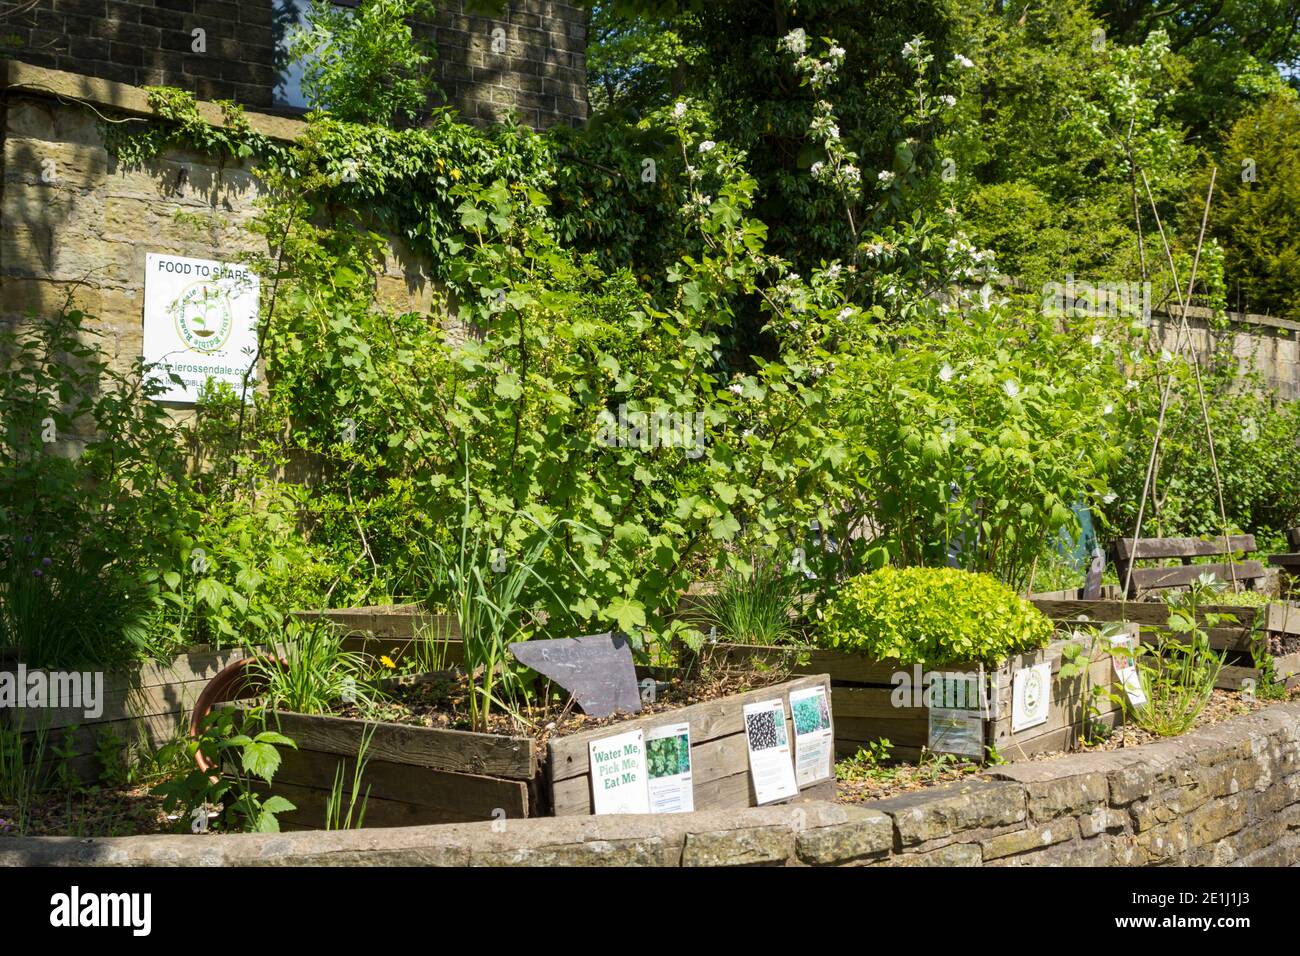 Incredible Edible, volunteer maintained, 'Food to Share' garden in the ground of the Whitaker museum, Rawtenstall. Stock Photo